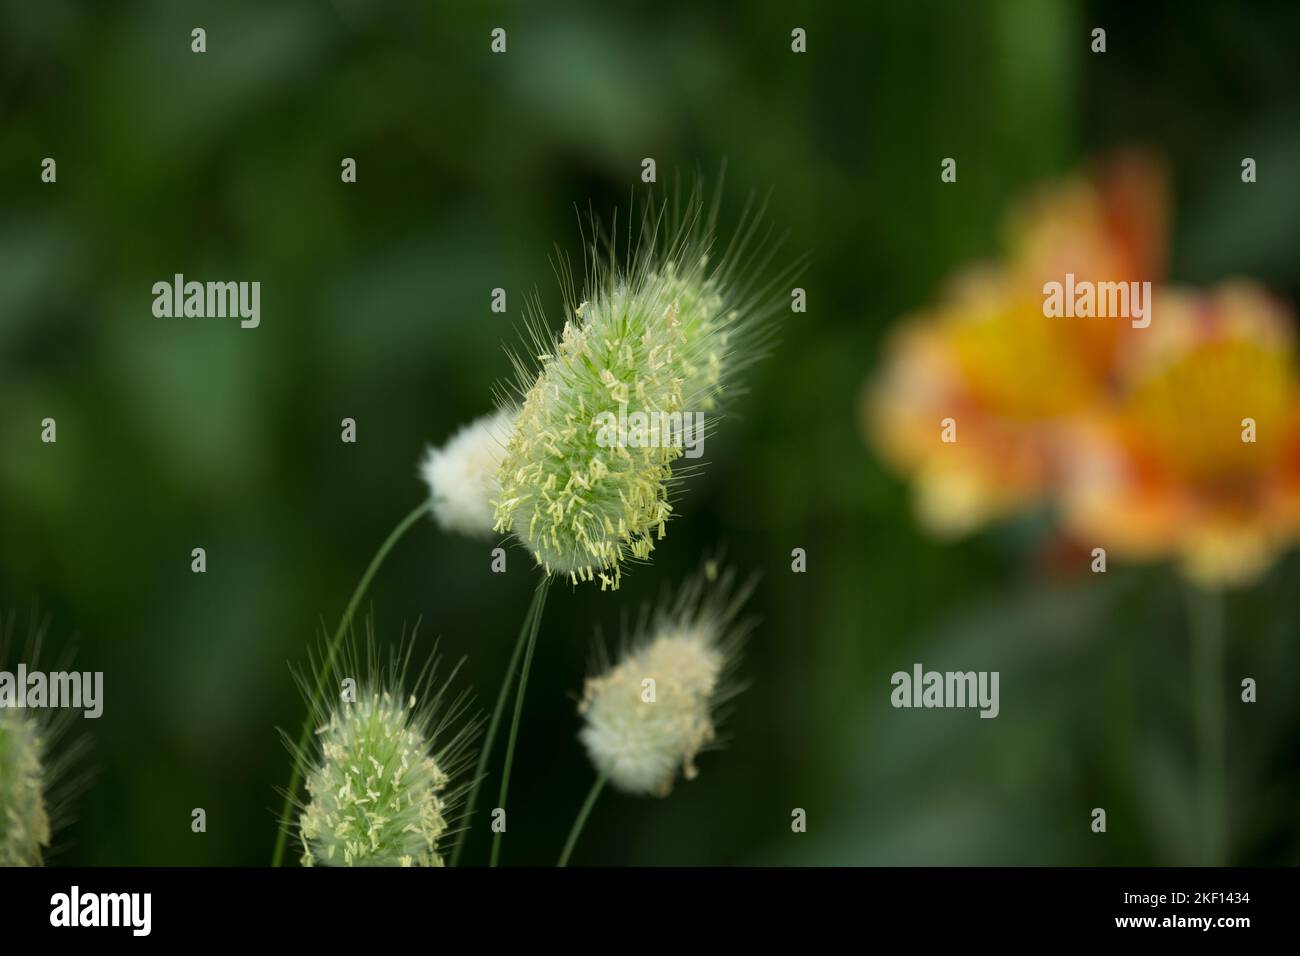 A few velvety grass with a fluffy inflorescence on the left side of the picture with orange flowers in the blurred background on the right side. Stock Photo